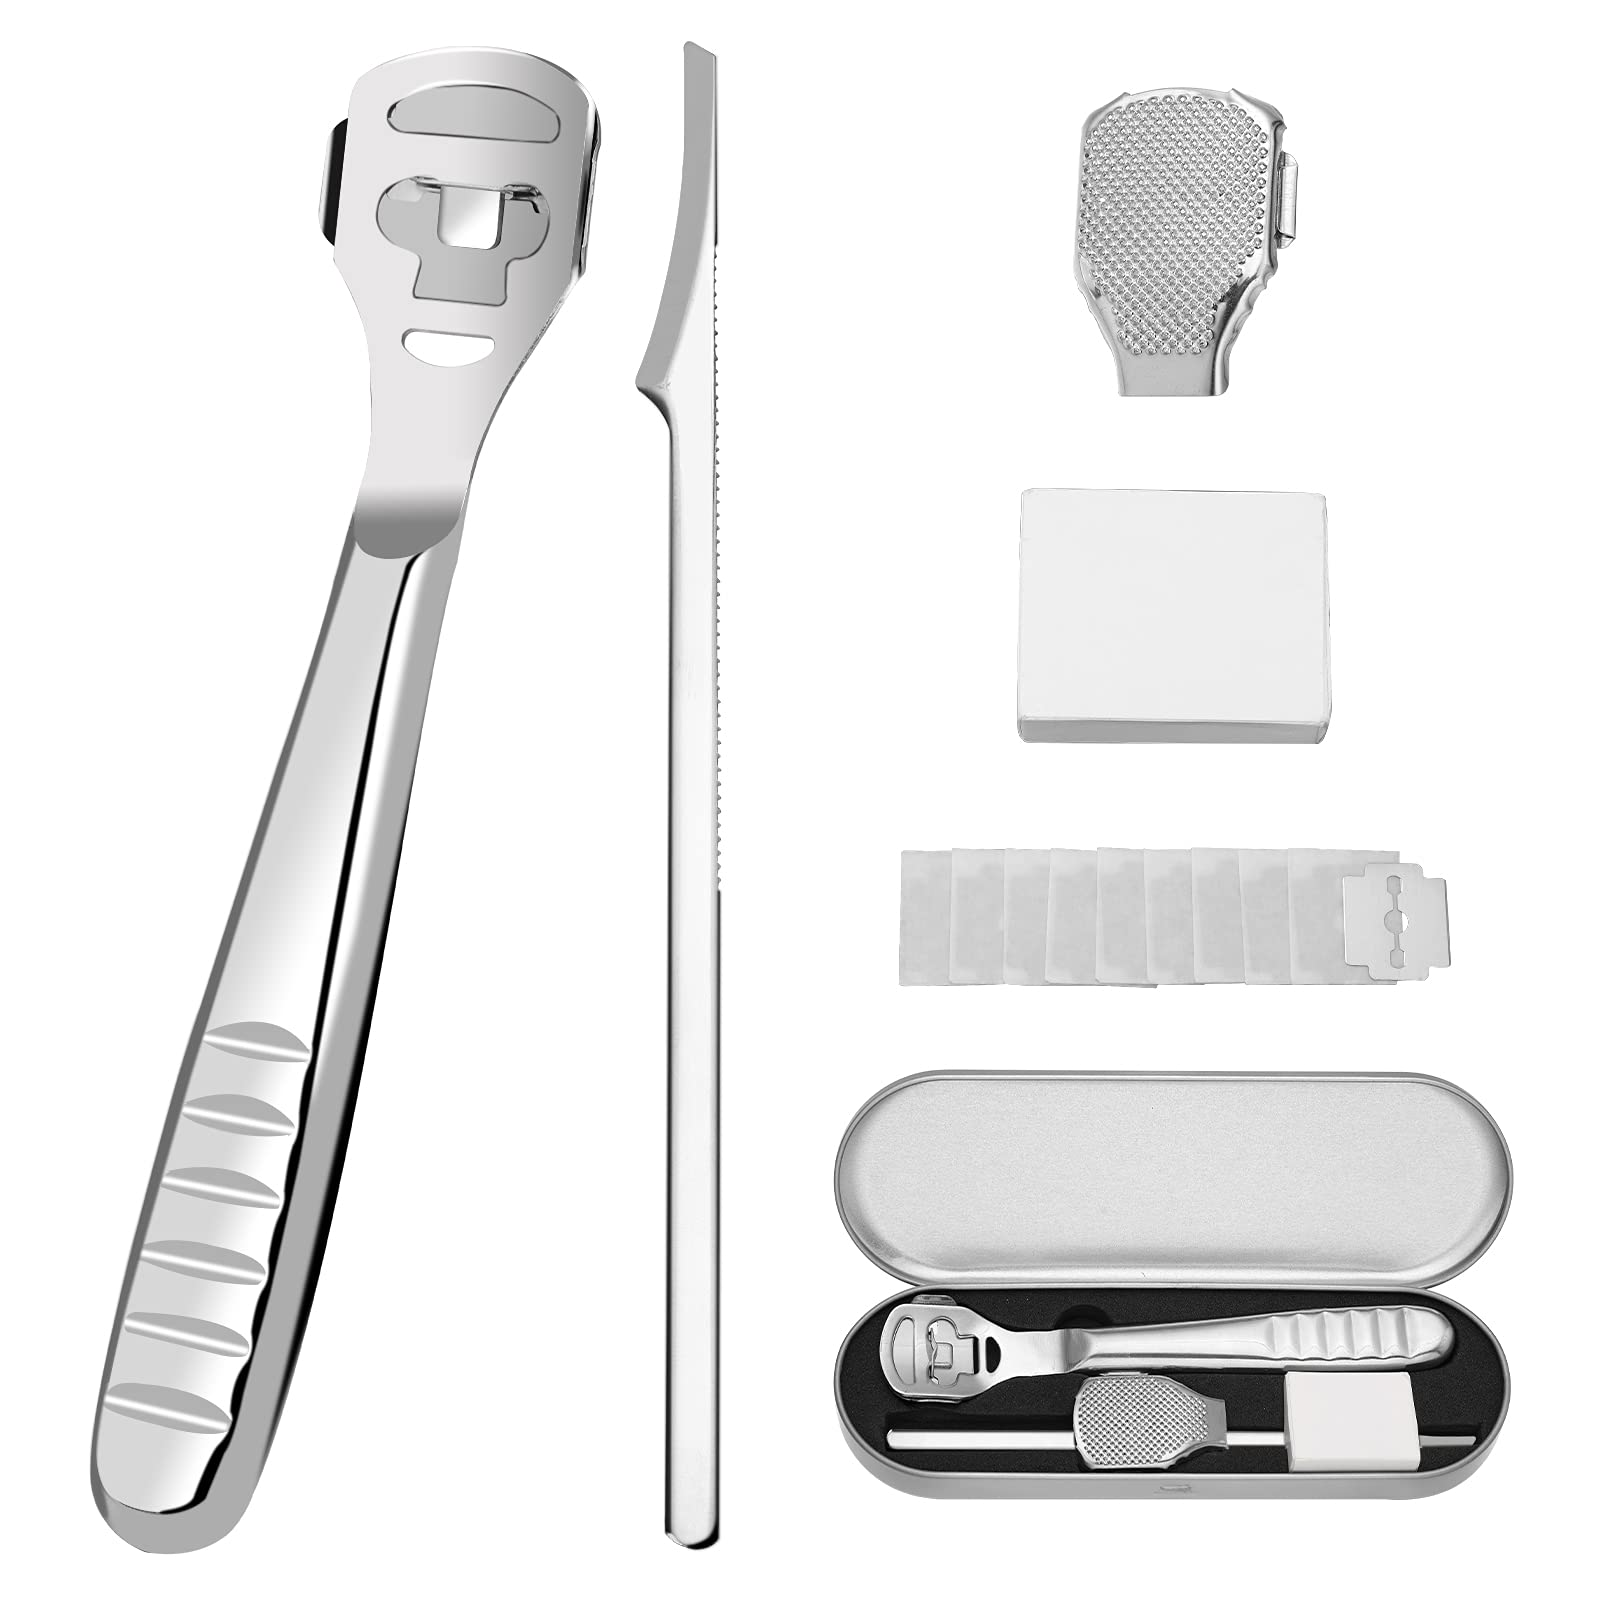 Foot Scraper - Foot File Dead Hard Skin Remover Feet Callus Shaver - Stainless Steel Foot Rasp Heel Corn Removal Pedicure Kit for Hand Feet Foot Care Tools with 10 Replacement Blades Silver